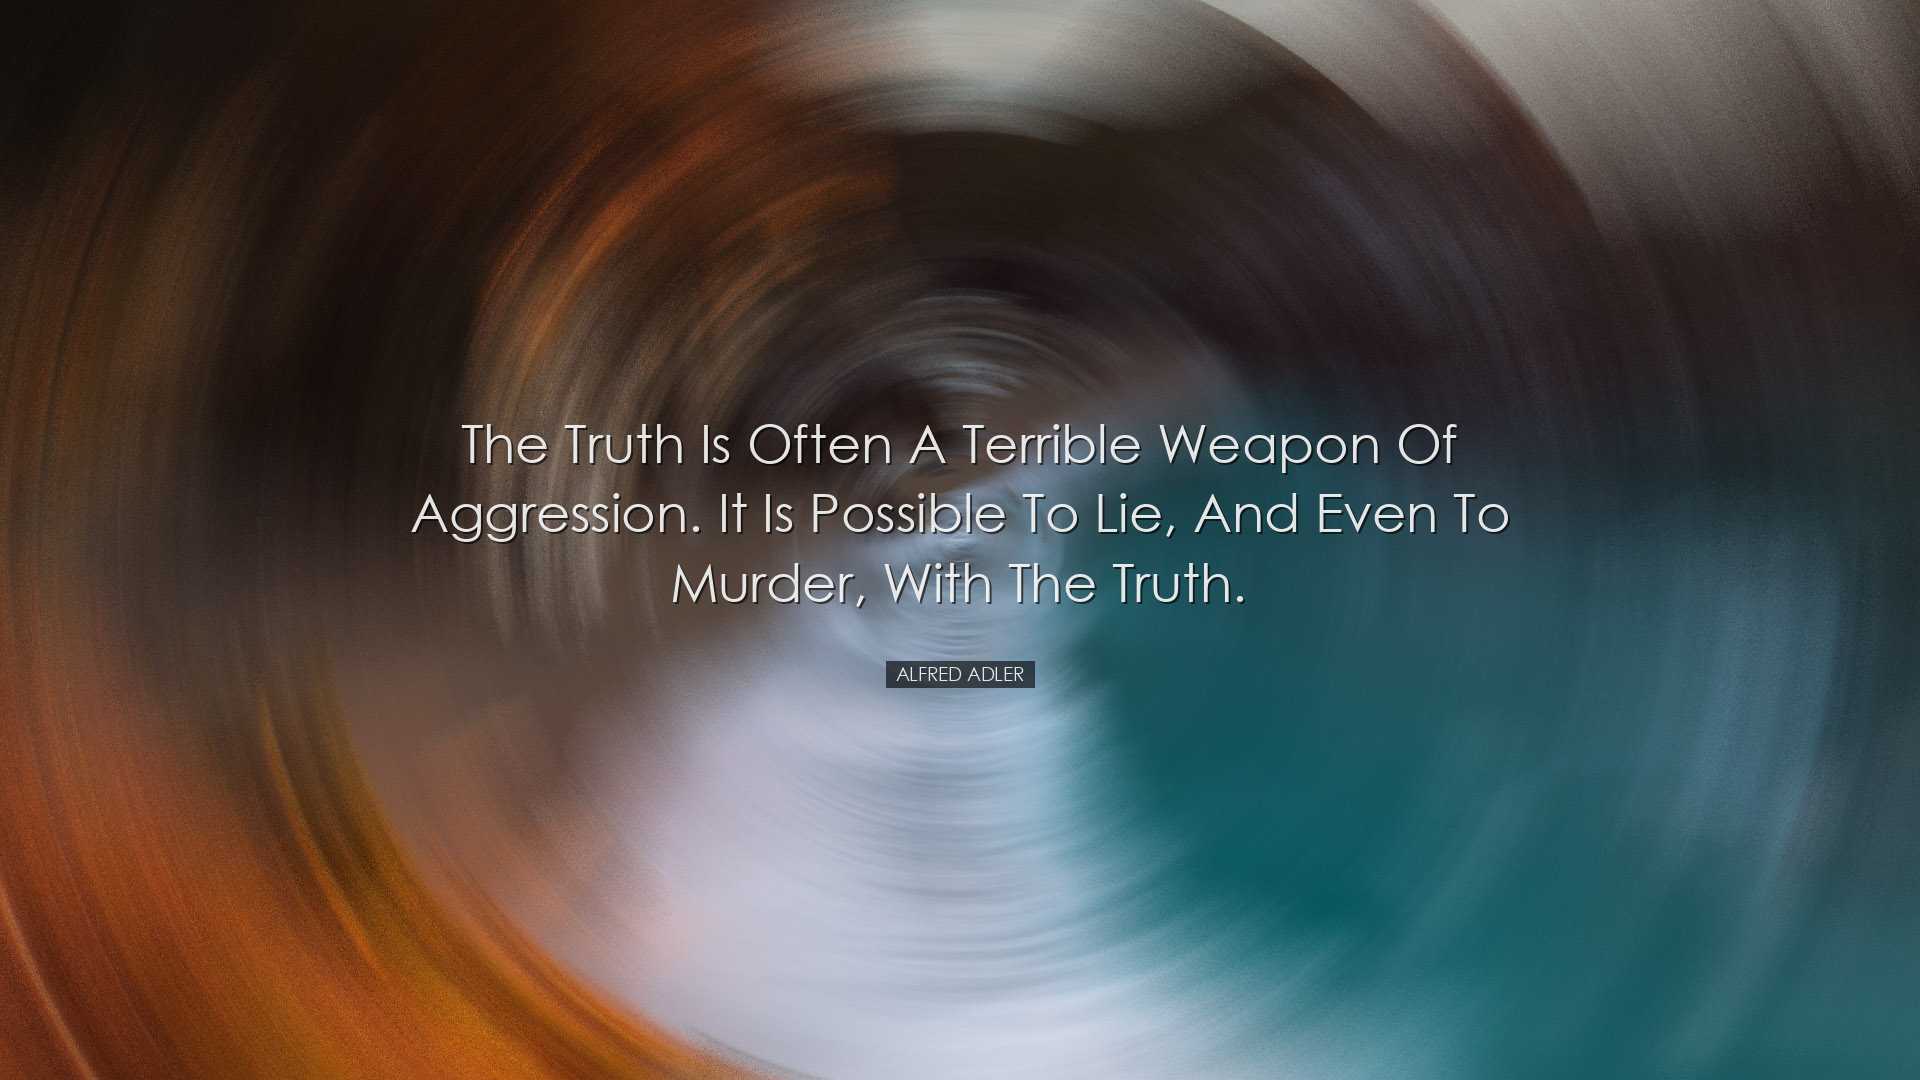 The truth is often a terrible weapon of aggression. It is possible